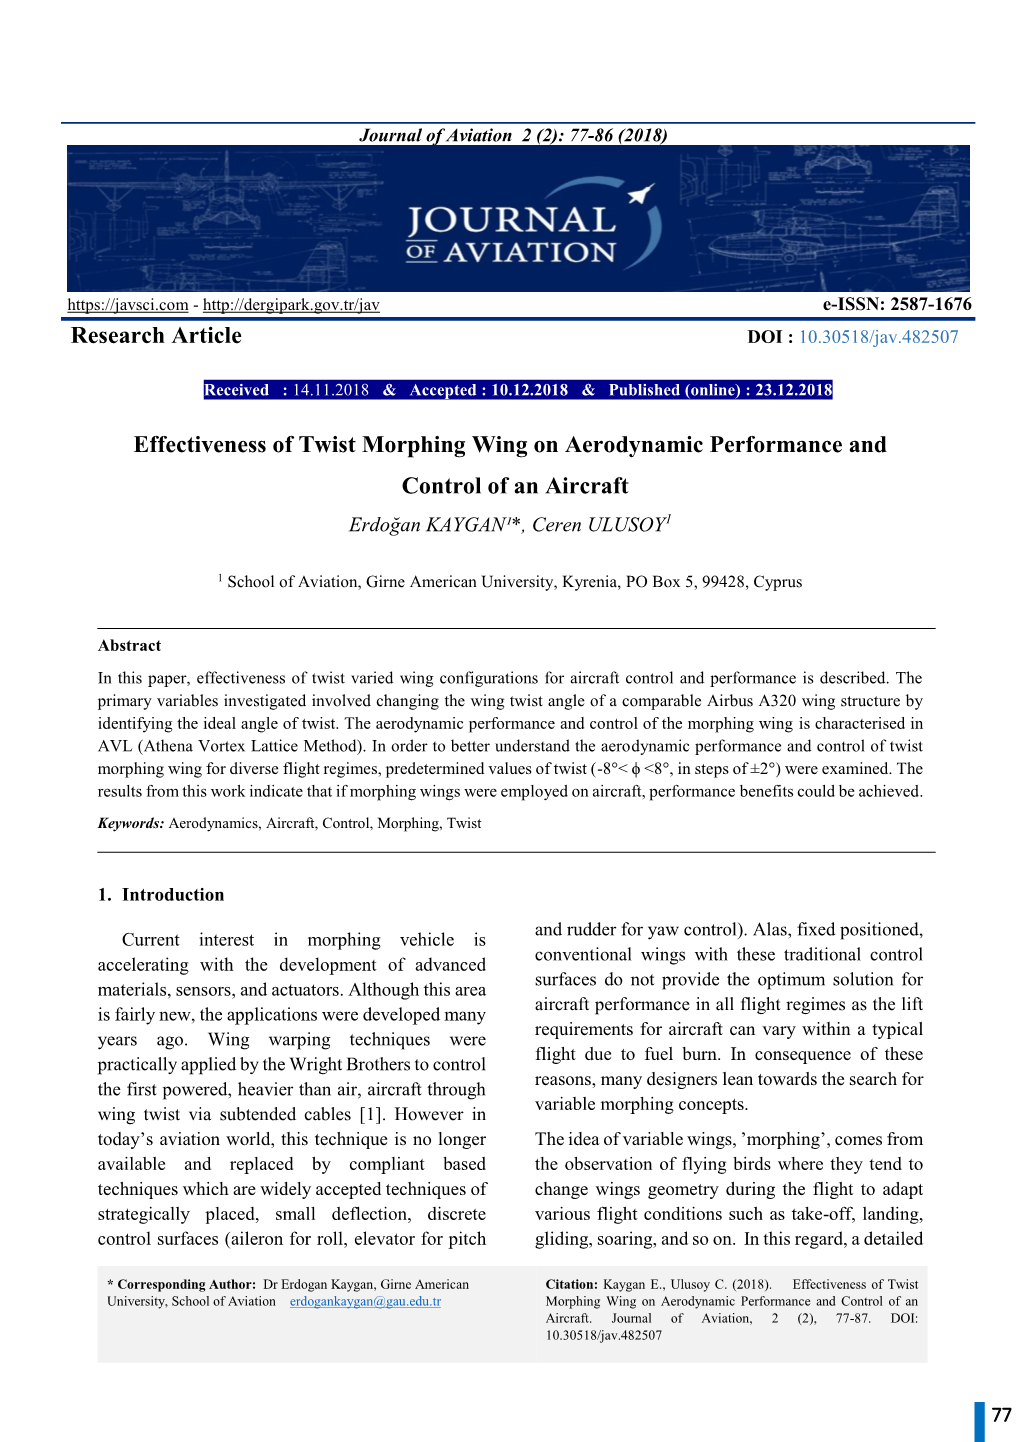 Research Article Effectiveness of Twist Morphing Wing on Aerodynamic Performance and Control of an Aircraft